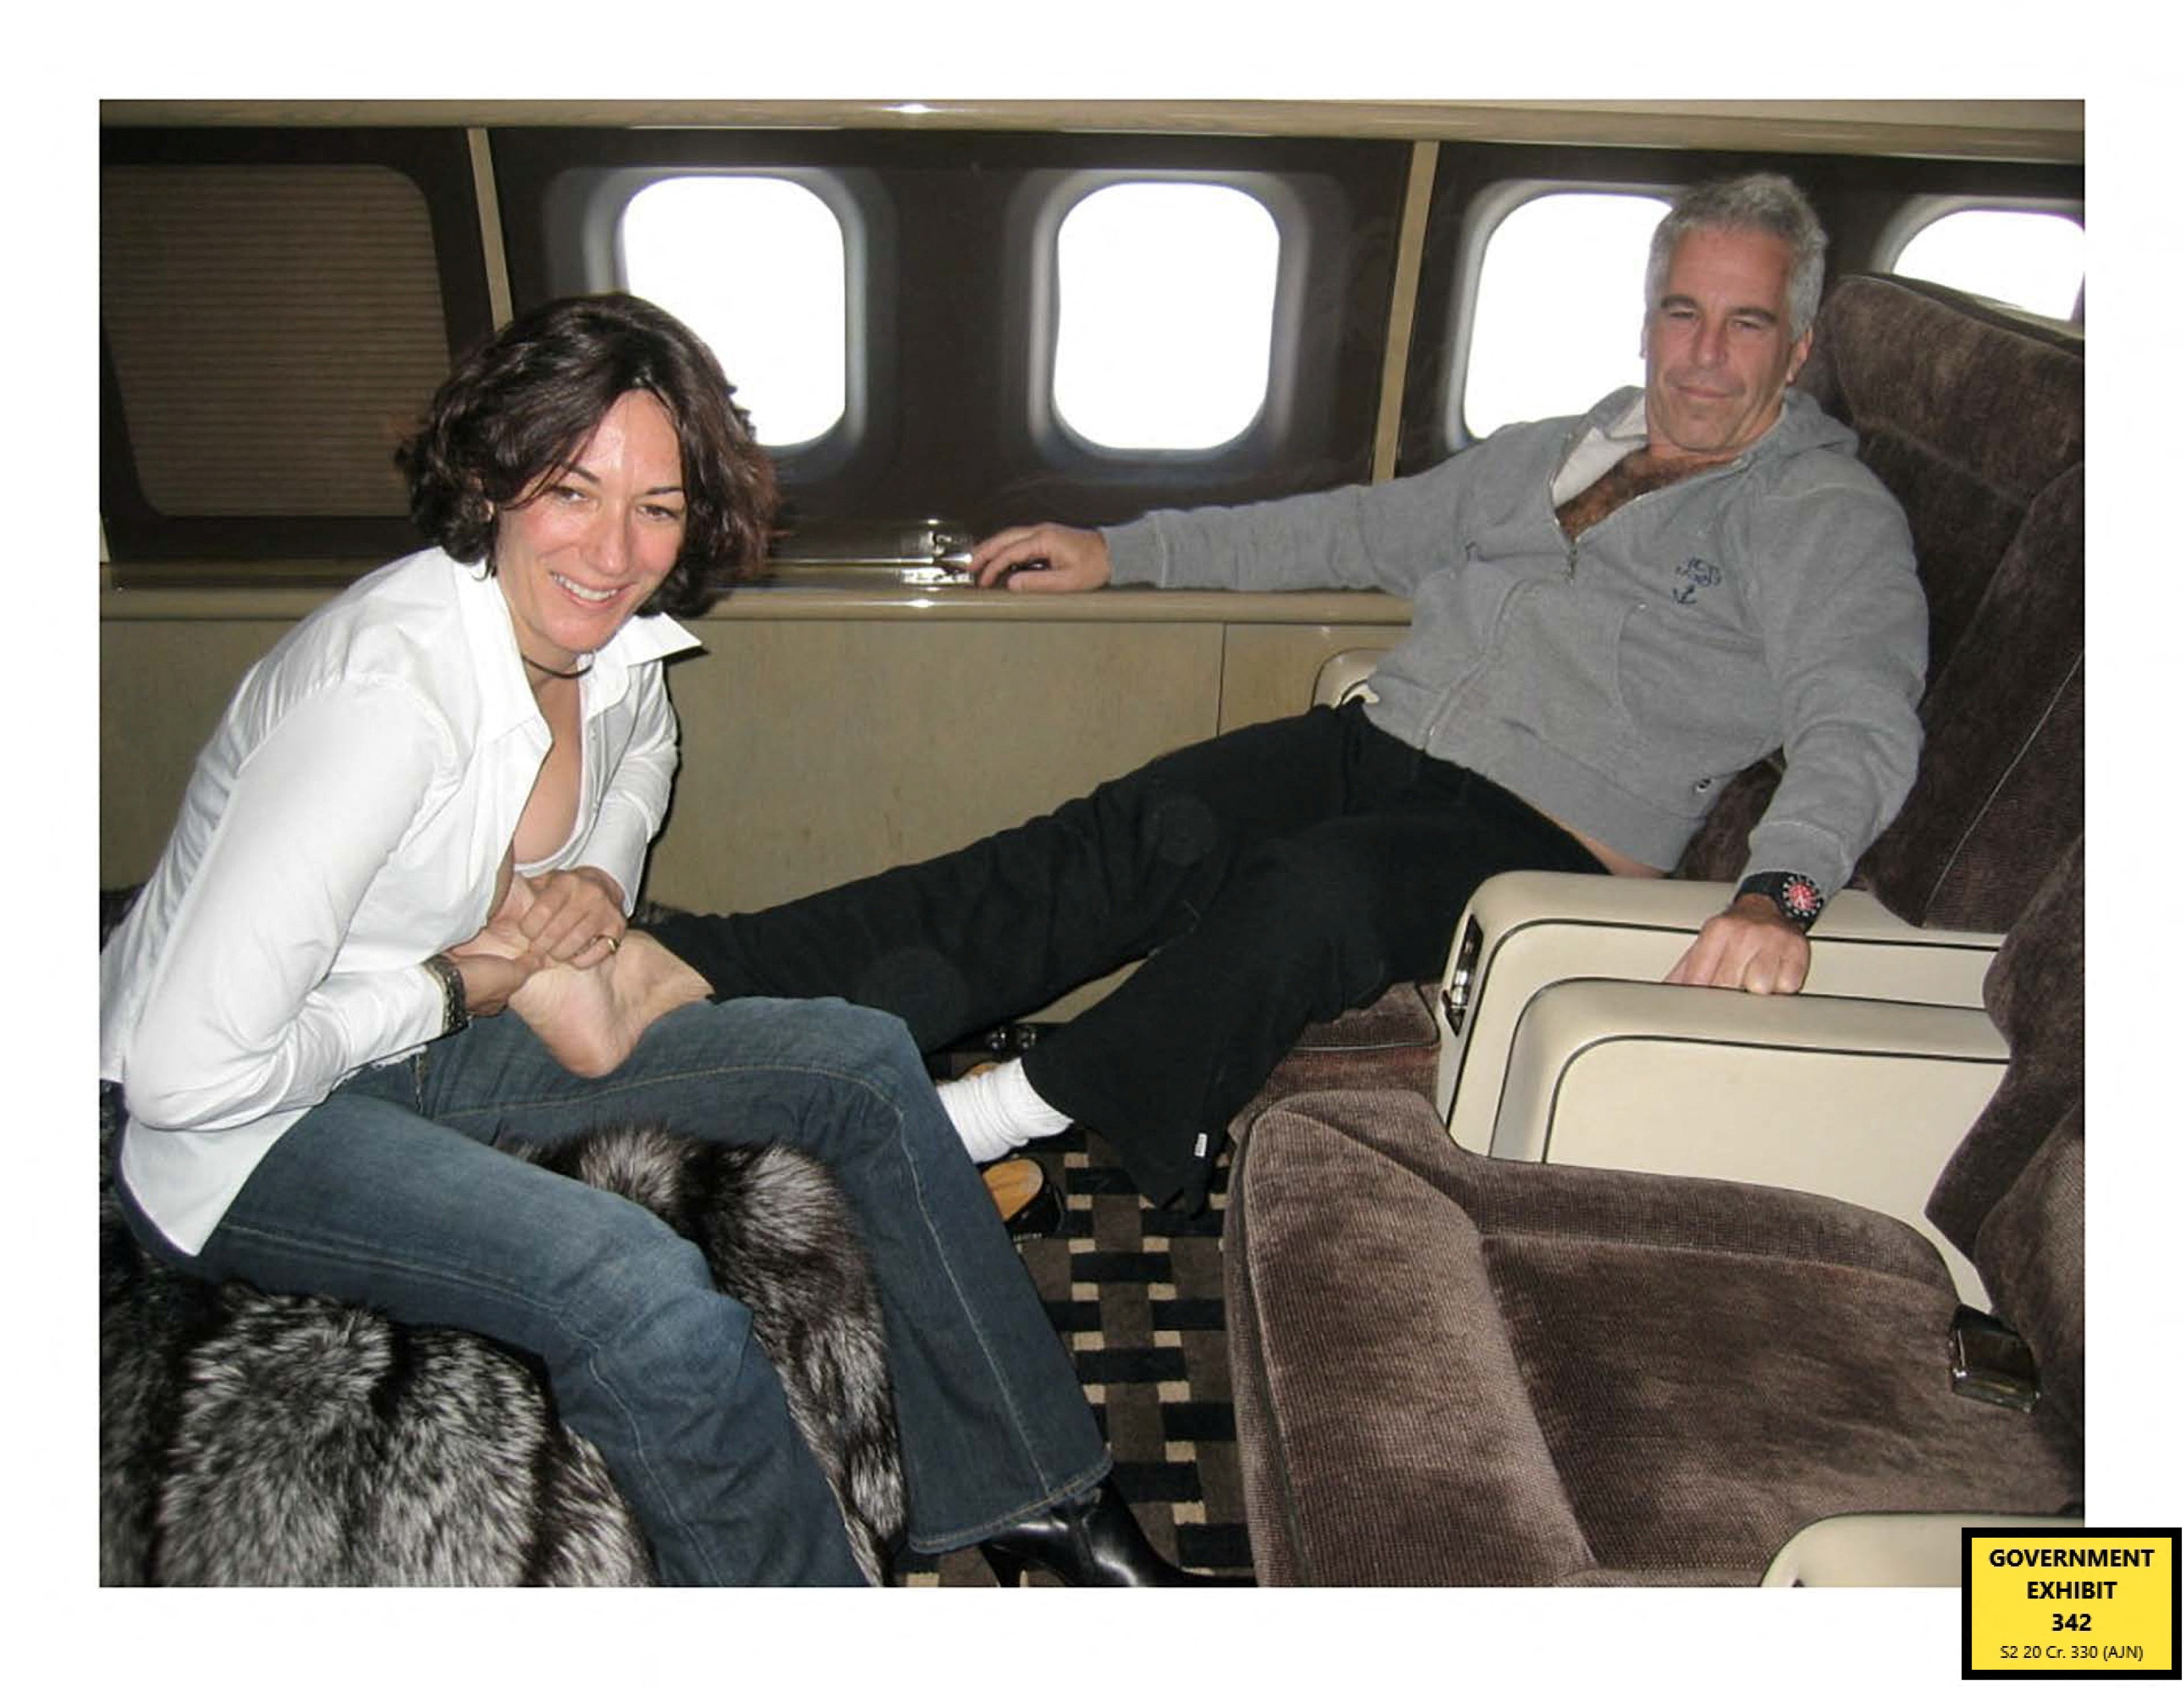 Epstein sent an email to Ghislaine Maxwell saying he was happy to ‘issue a reward’ to Virginia Guiffre’s friends